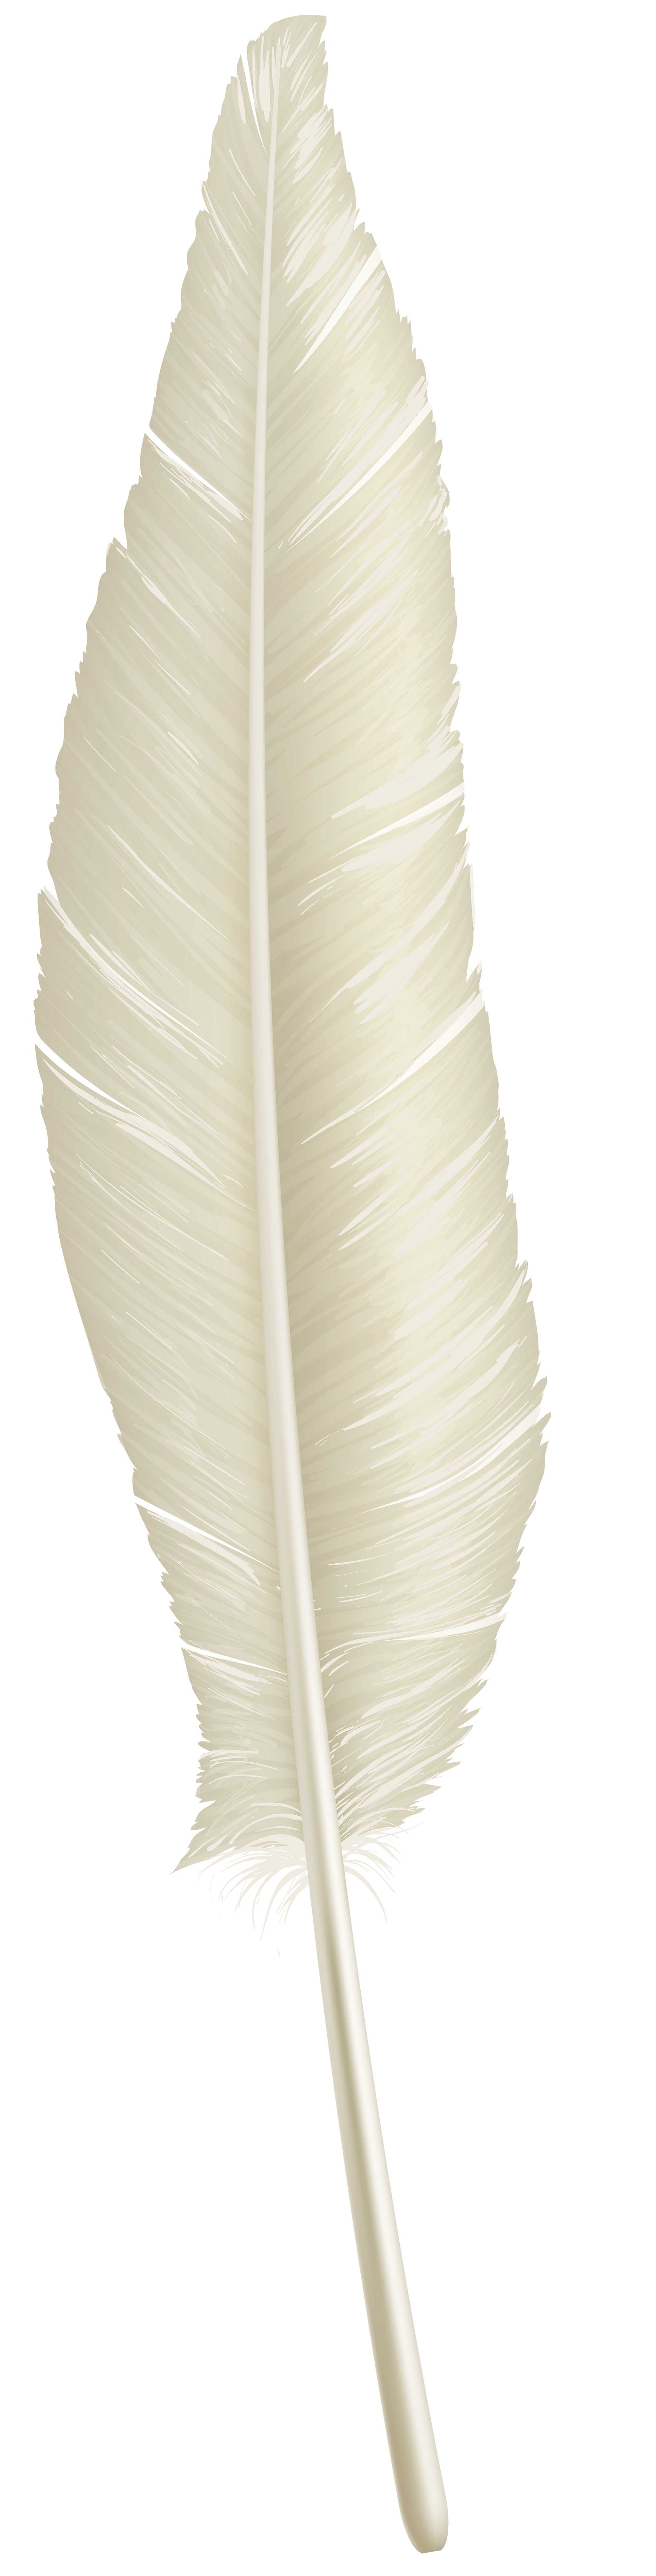 White Feather PNG Clip Art Image​, Gallery Yopriceville - High-Quality  Images and Transparent PNG Free Clipart